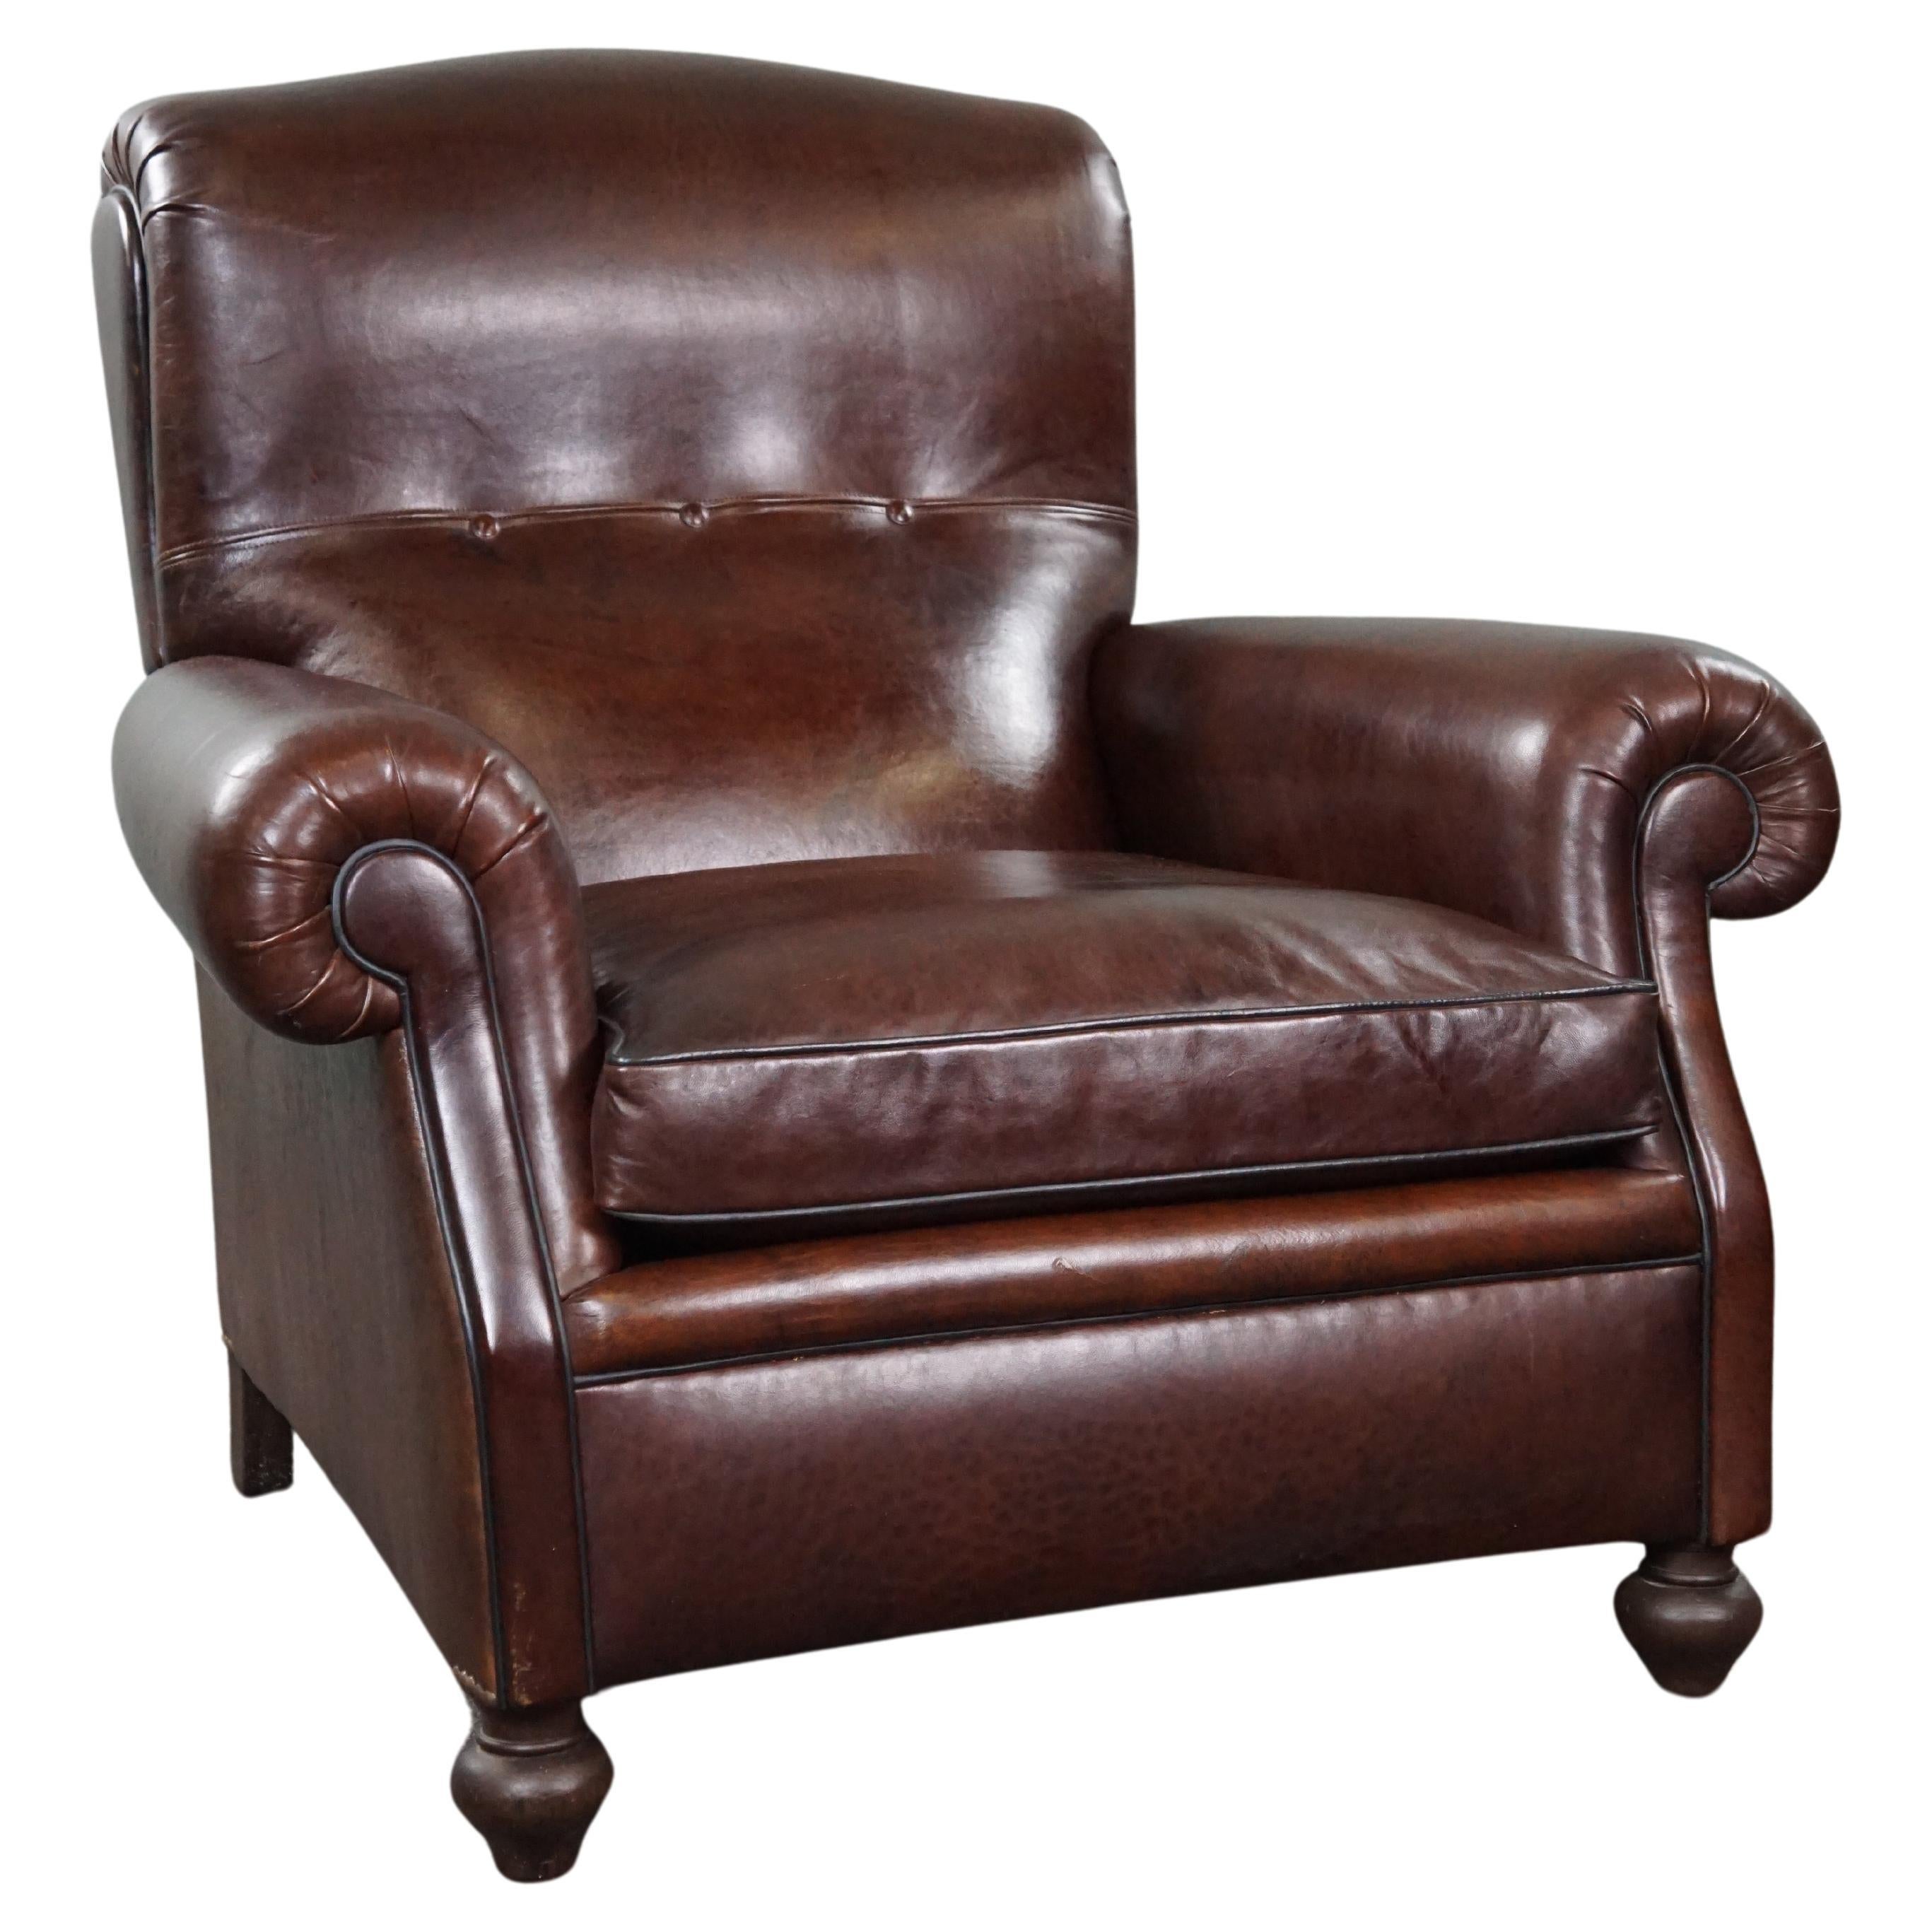 Recently reupholstered old English armchair in dark sheep leather color For Sale